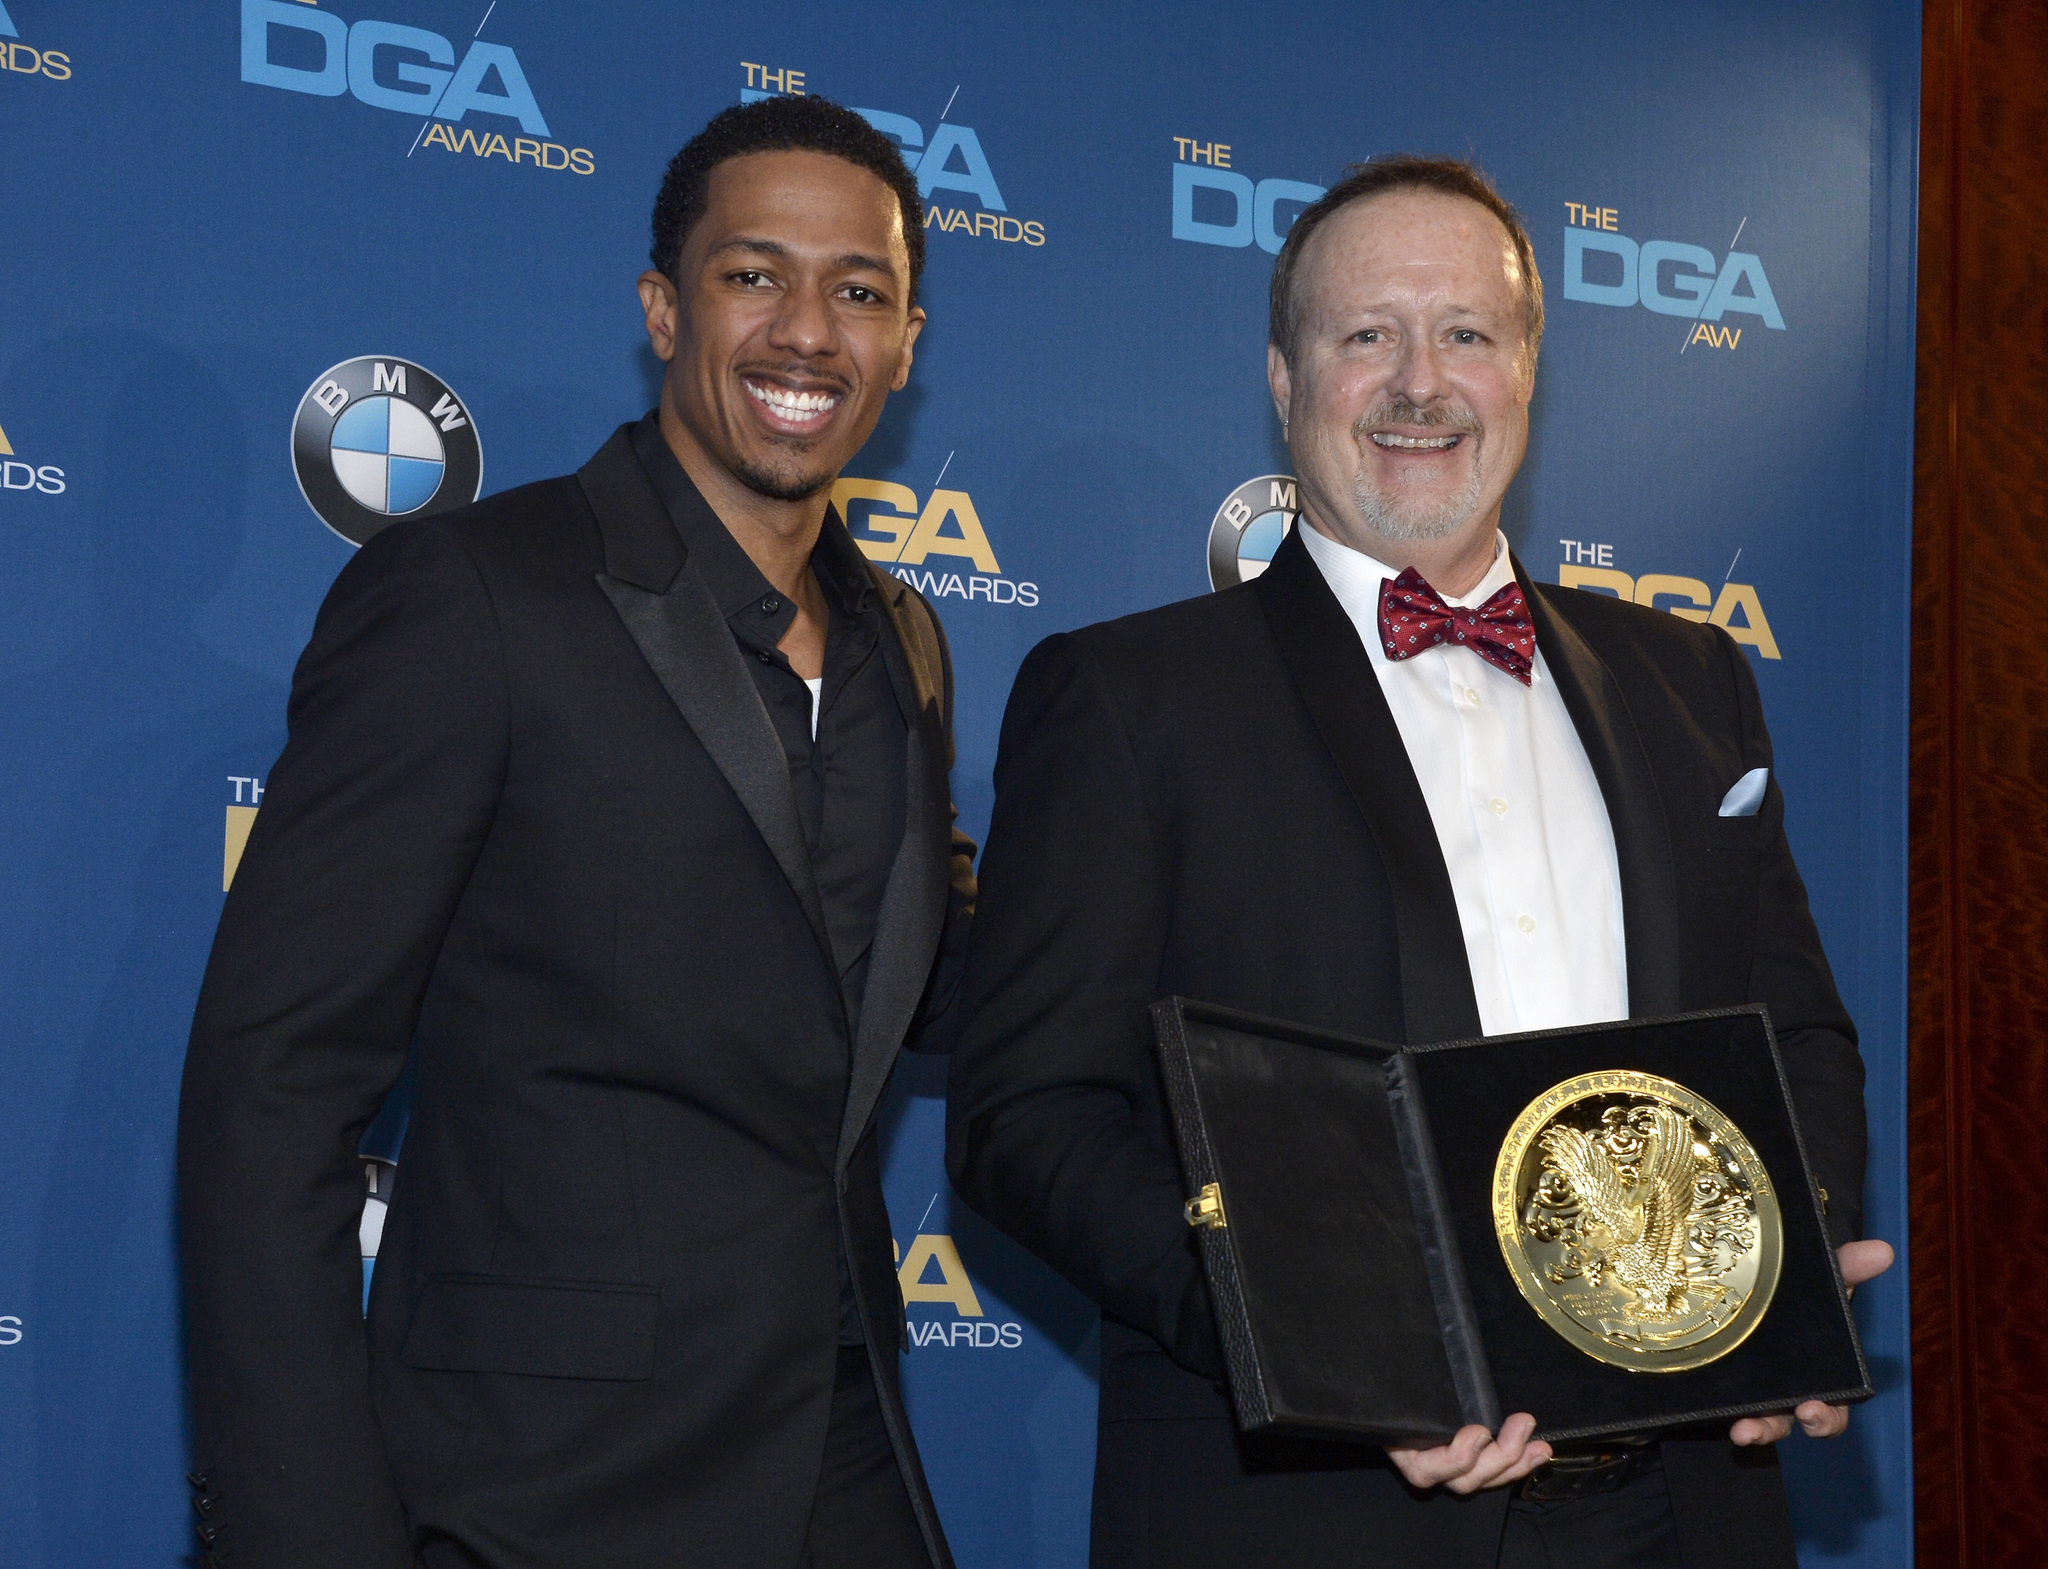 Nick Cannon and Neil DeGroot